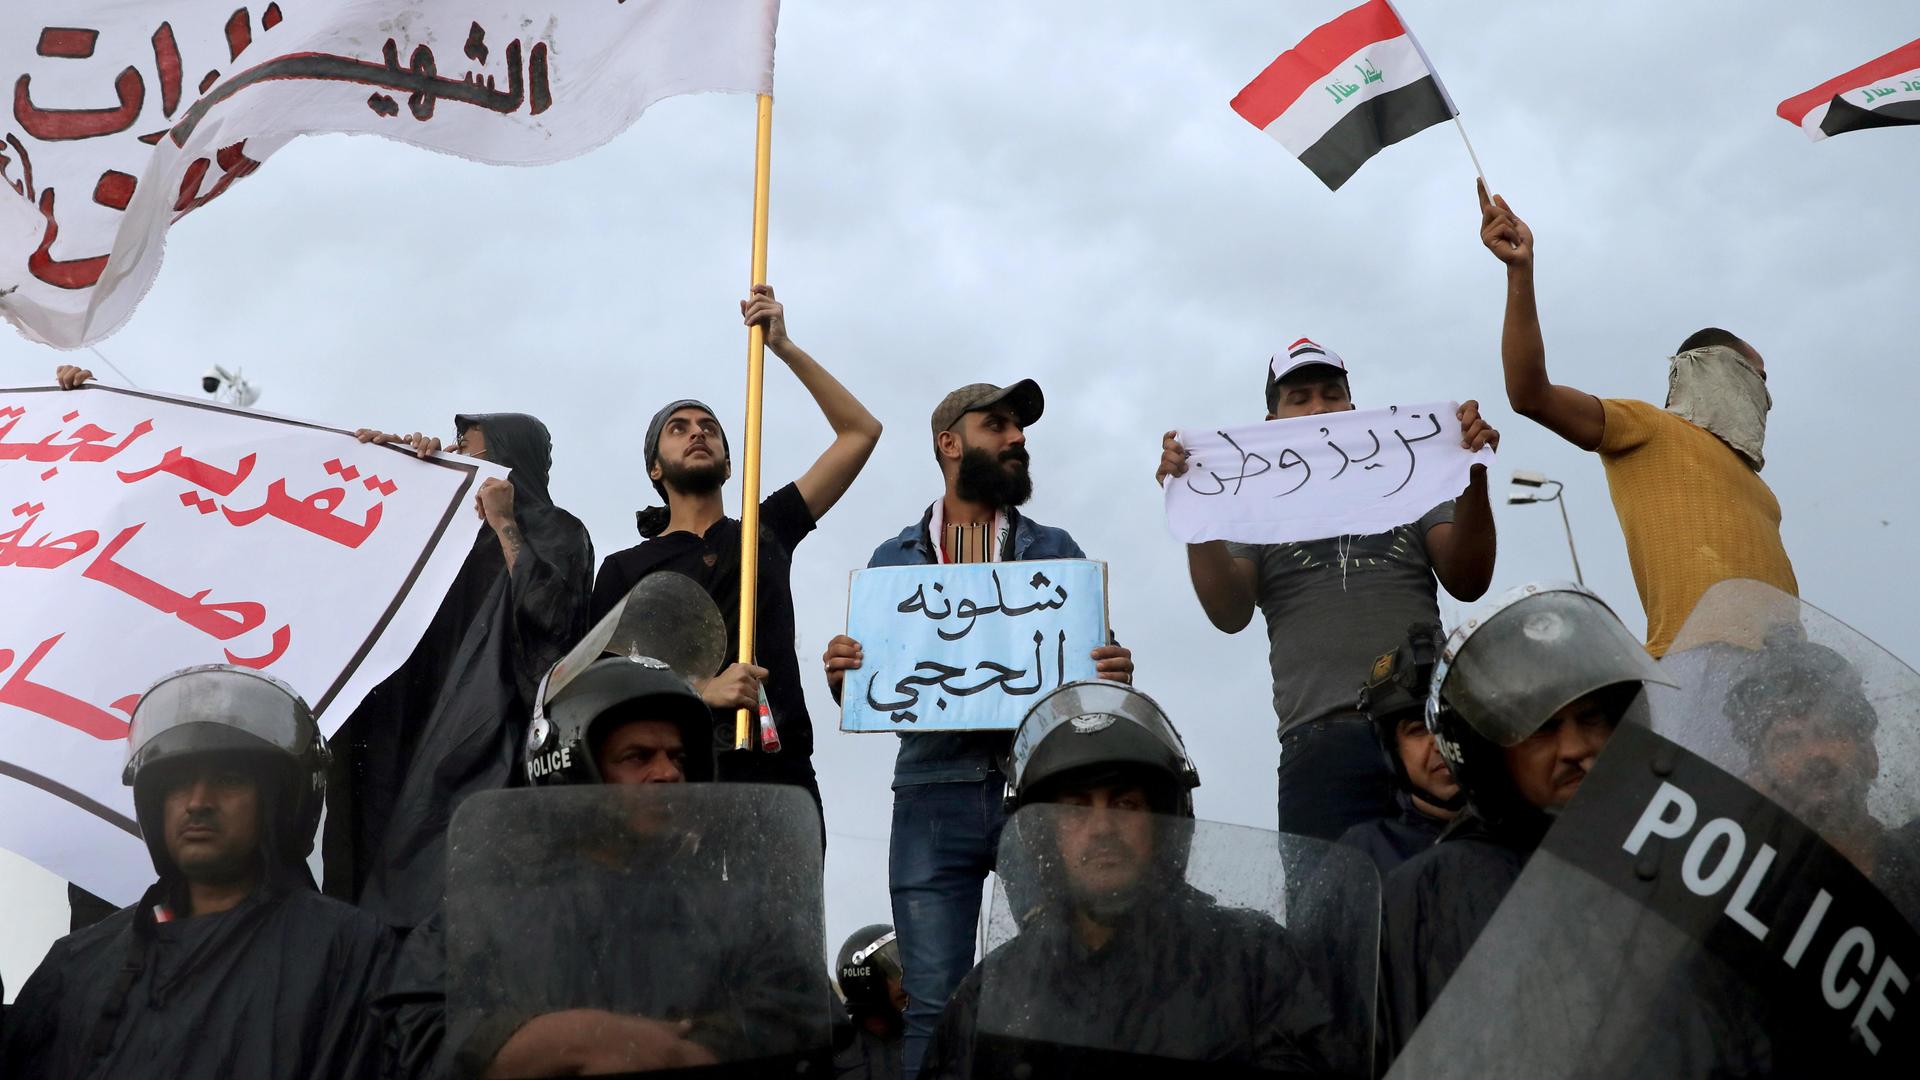 Iraqi policemen stand in front of demonstrators during a protest over corruption, lack of jobs, and poor services, in Kerbala, Iraq, on October 25, 2019.